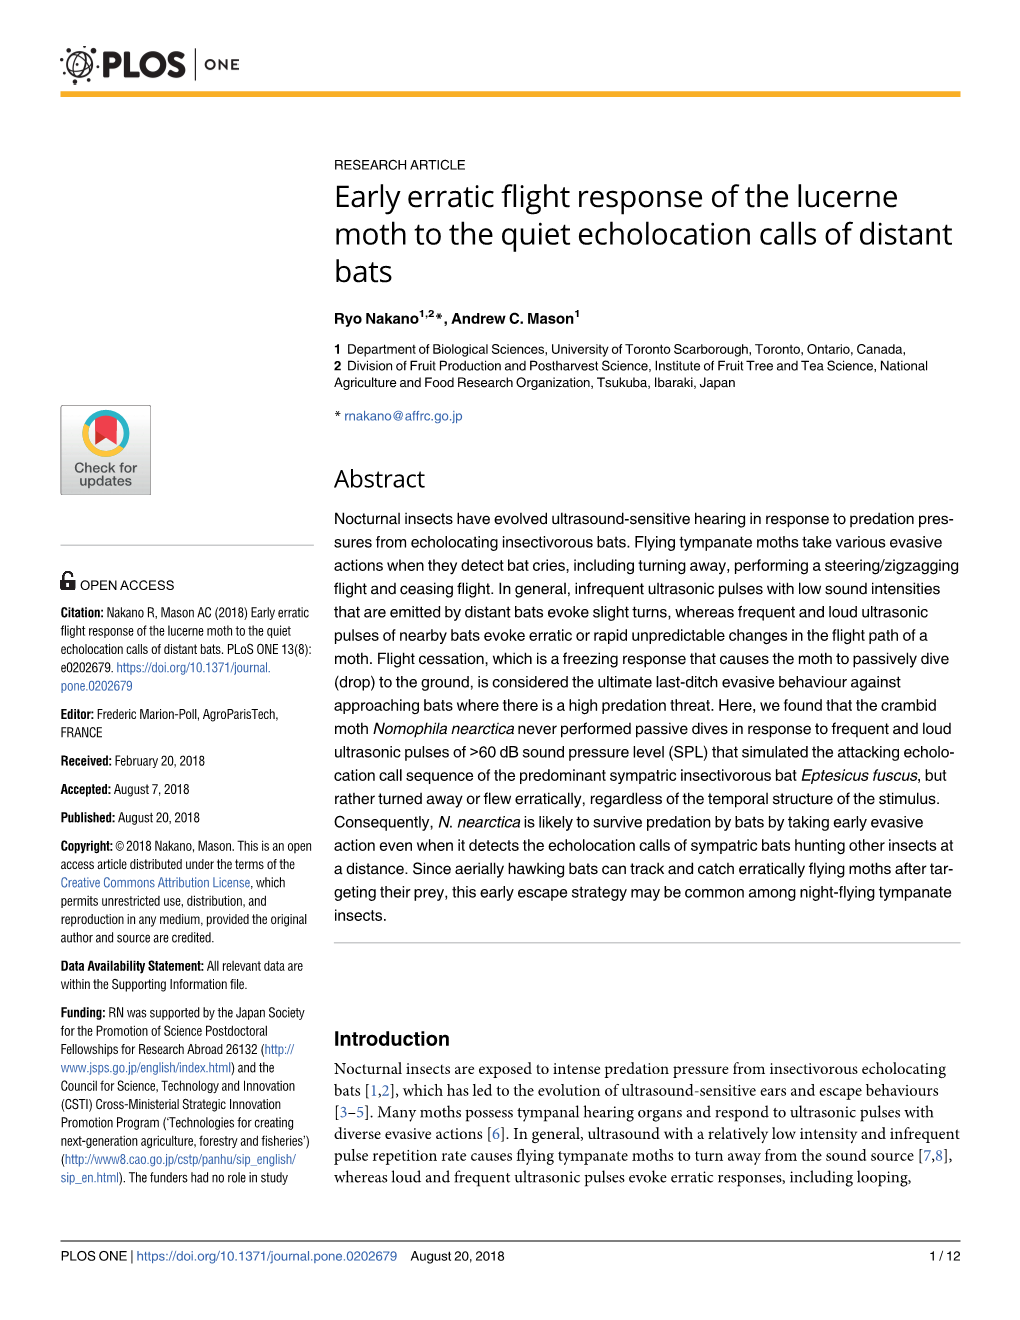 Early Erratic Flight Response of the Lucerne Moth to the Quiet Echolocation Calls of Distant Bats